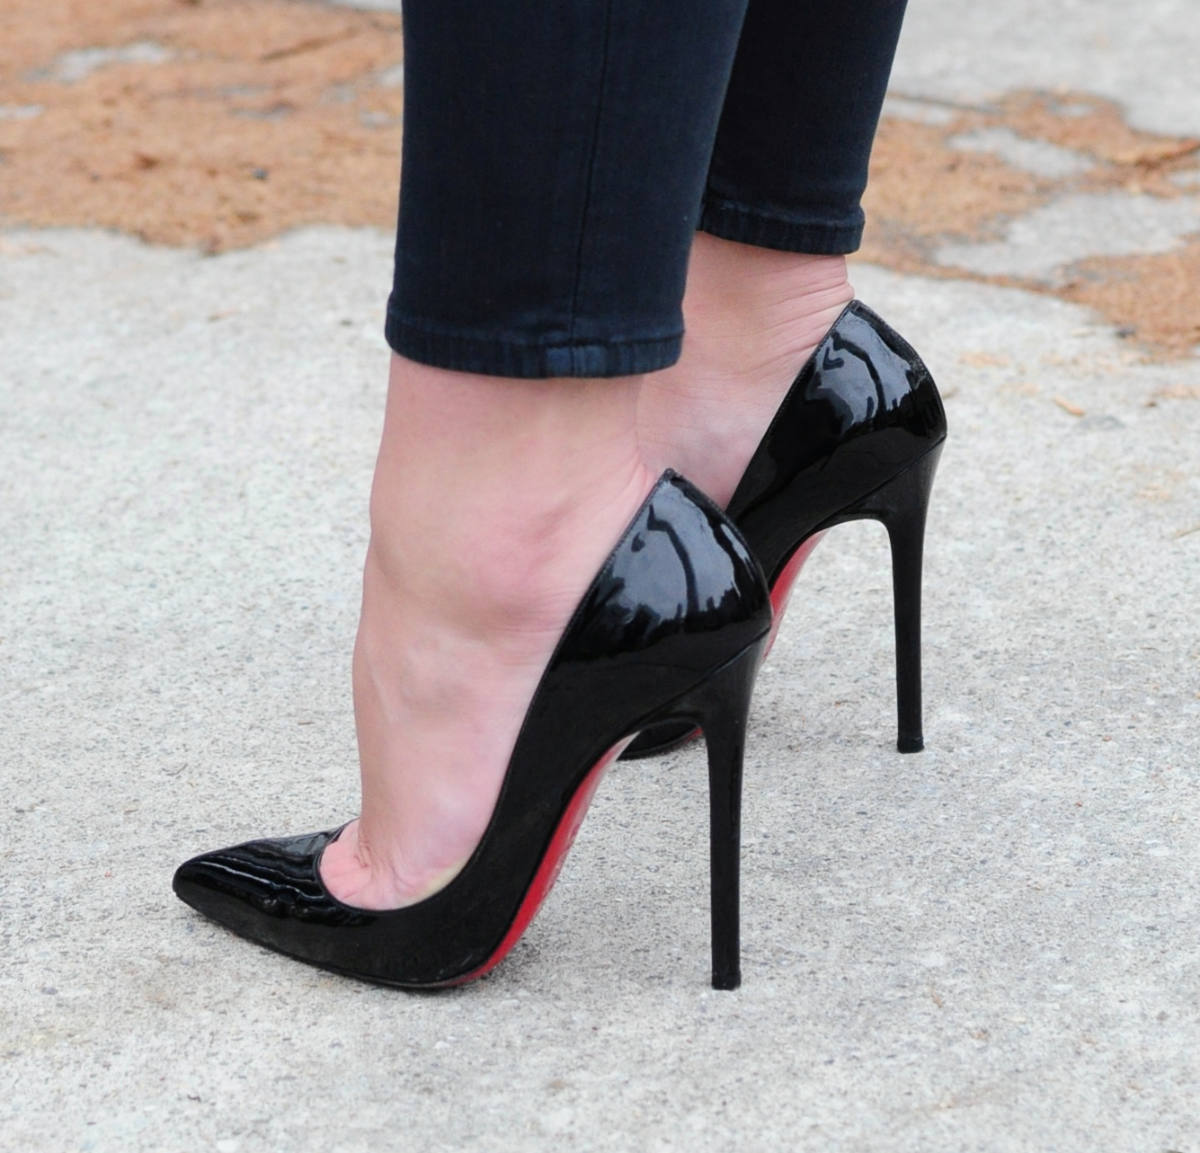 Are High Heel Shoes Really That Bad For You? | High Heel Shoes